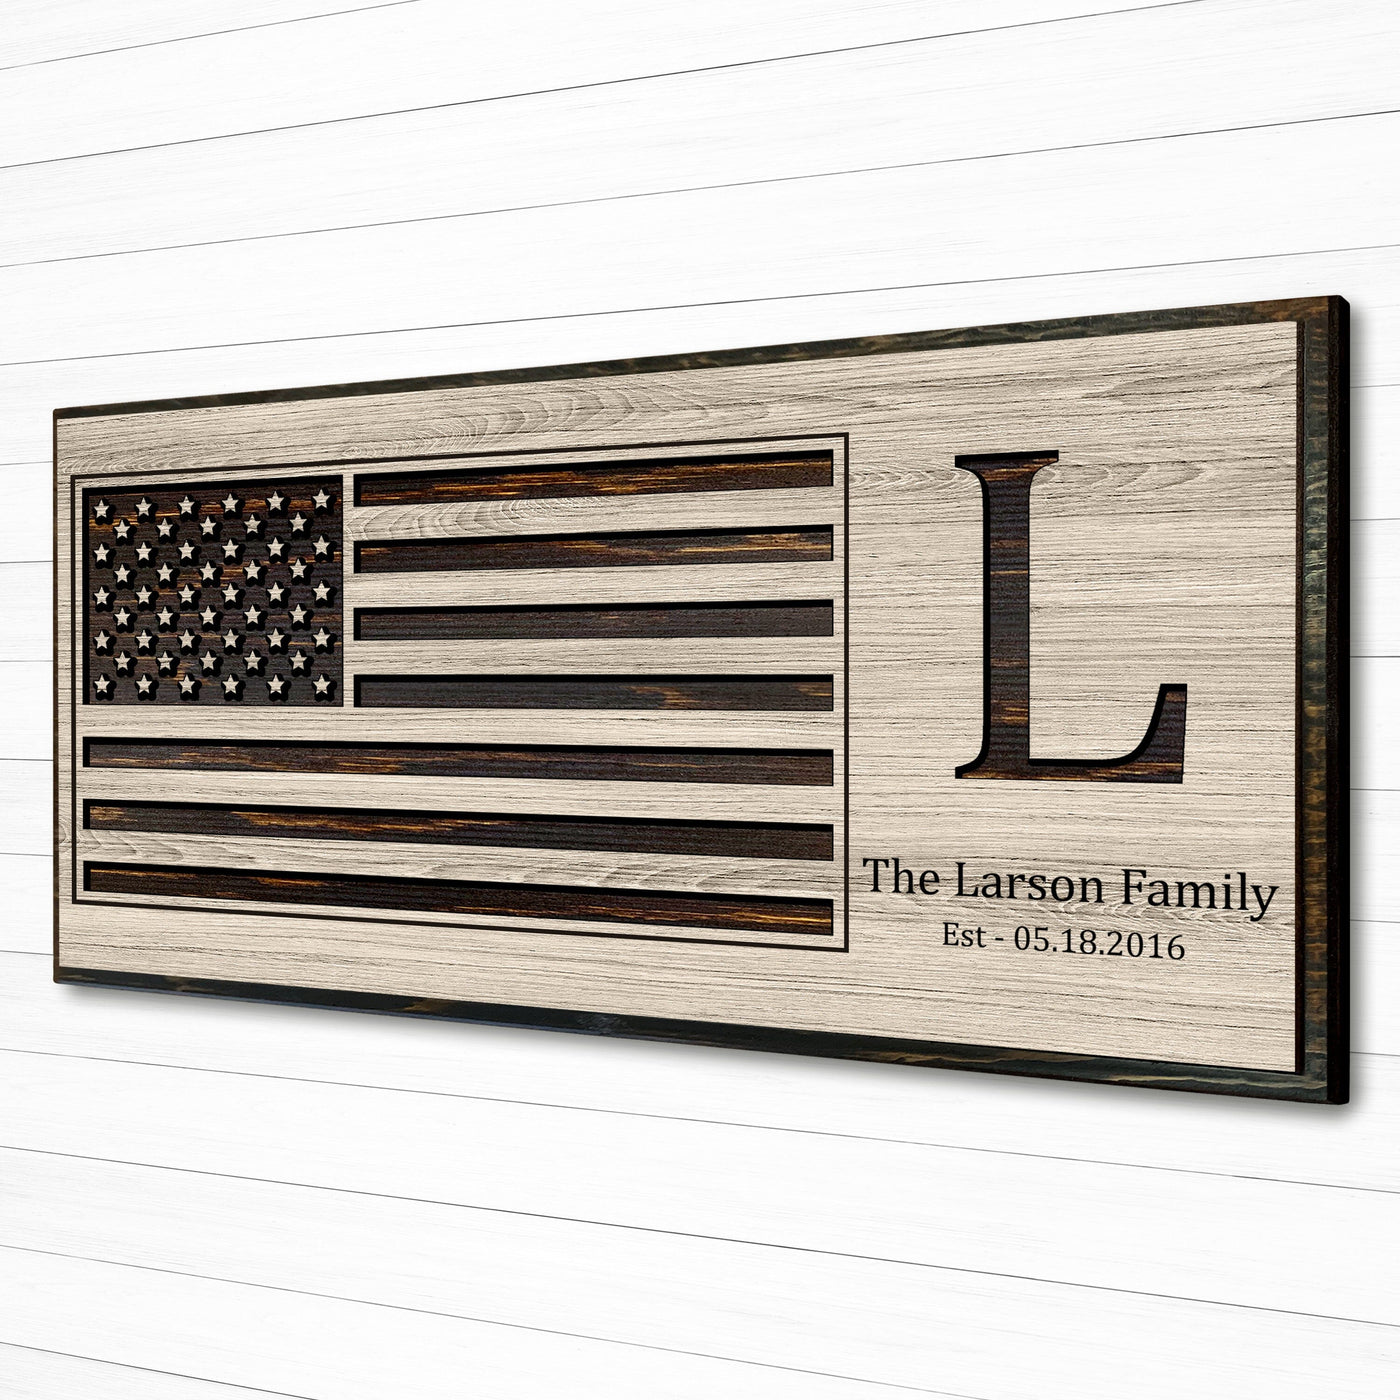 custom carved american flag wood wall art with family name and established date